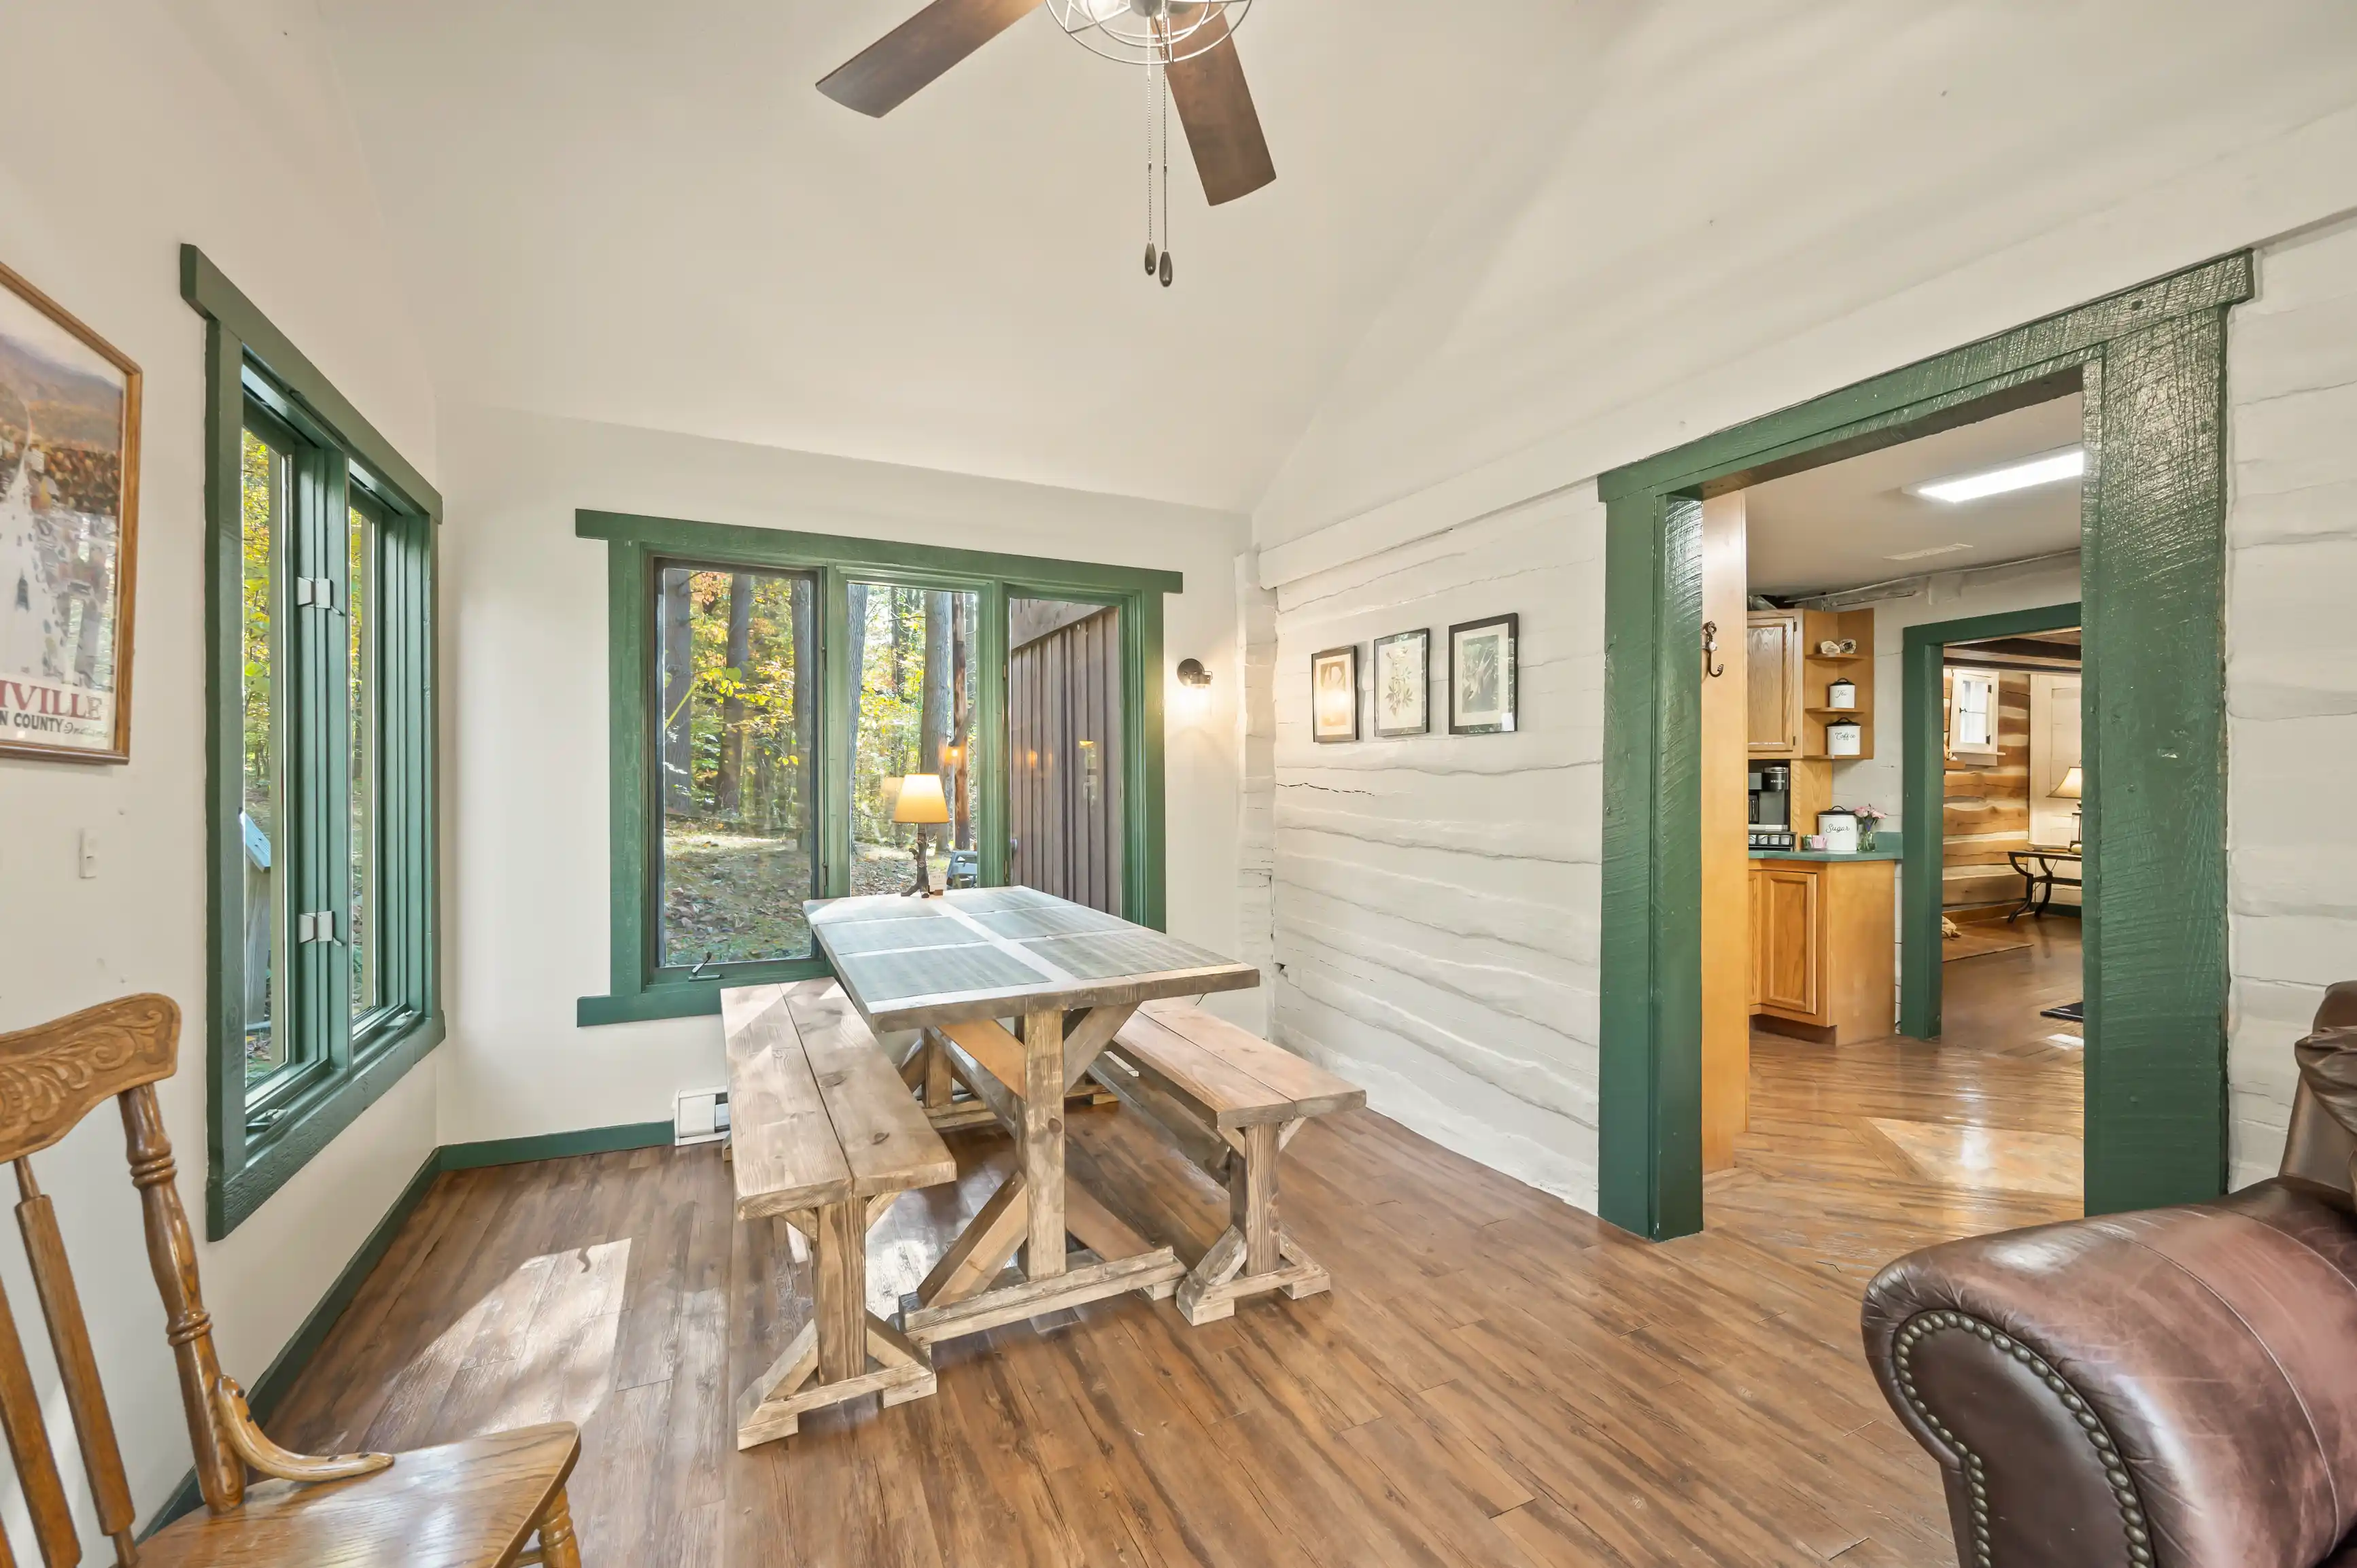 Cozy cottage-style dining area with a wooden picnic table and benches, hardwood floors, a rocking chair, and green-trimmed windows with views of nature outside.